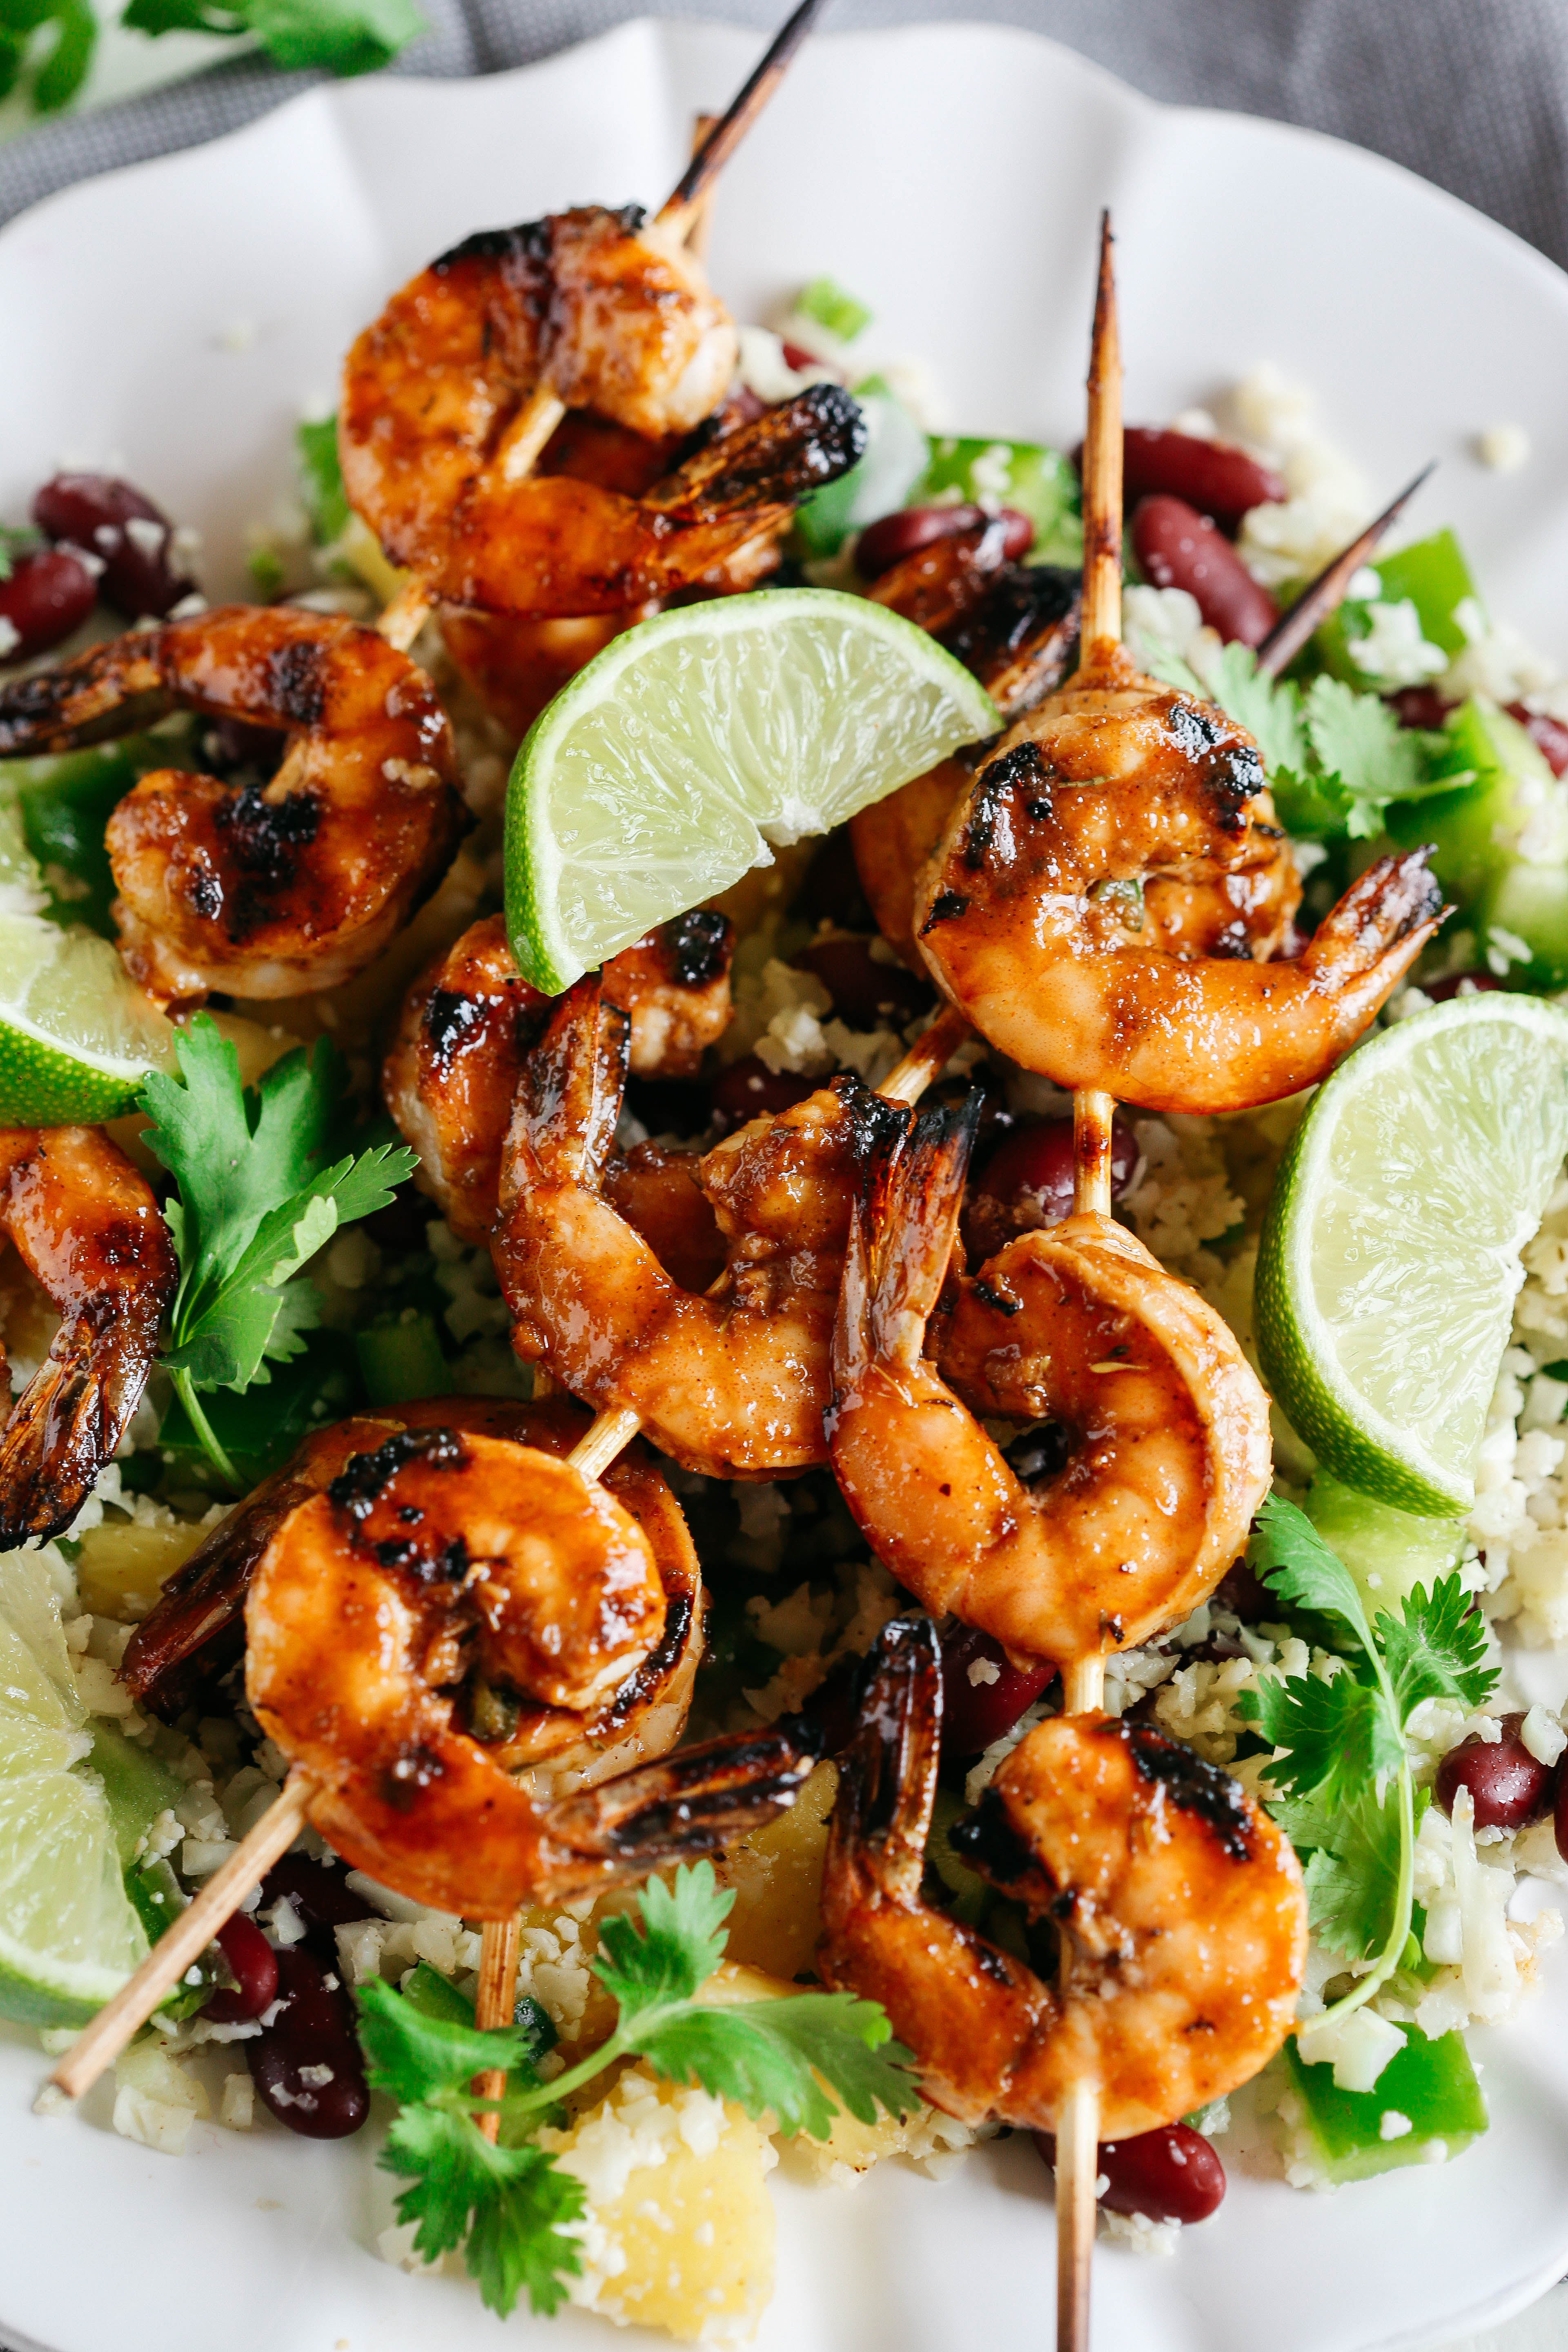 This Caribbean Jerk Shrimp with Cauliflower Rice is super flavorful, deliciously filling and perfect for weekly meal prep!